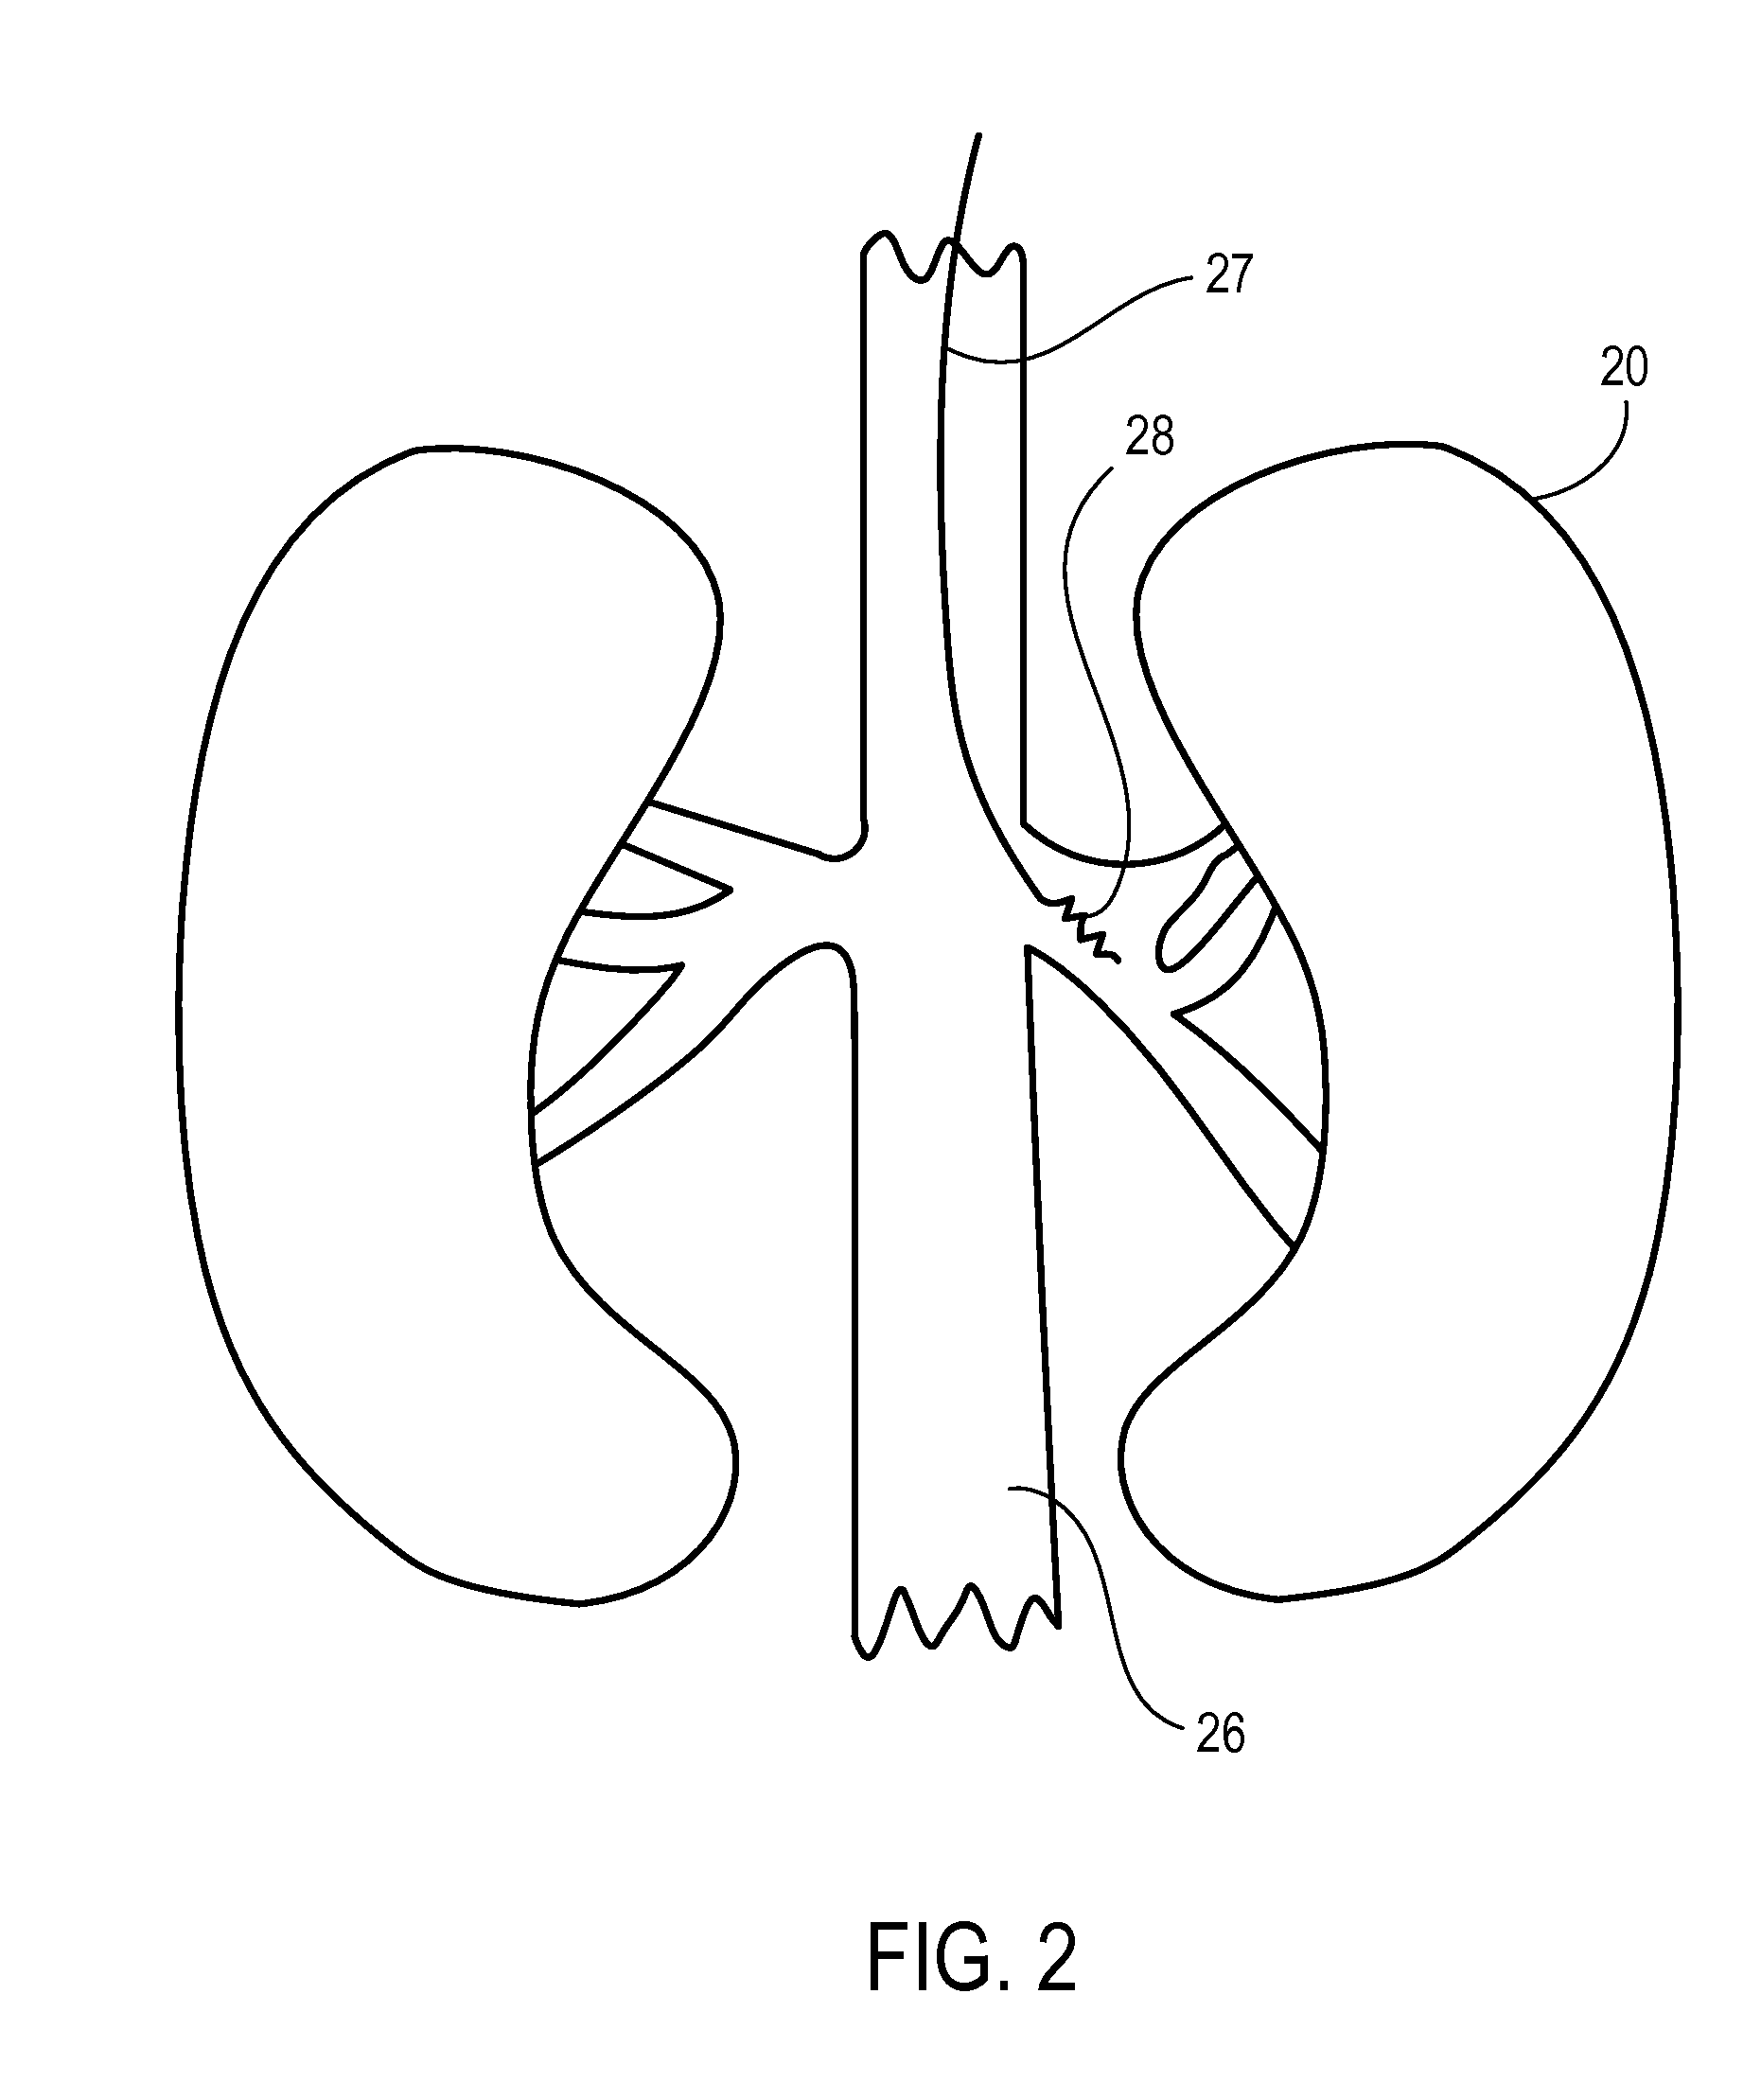 Methods and materials for treating syncope